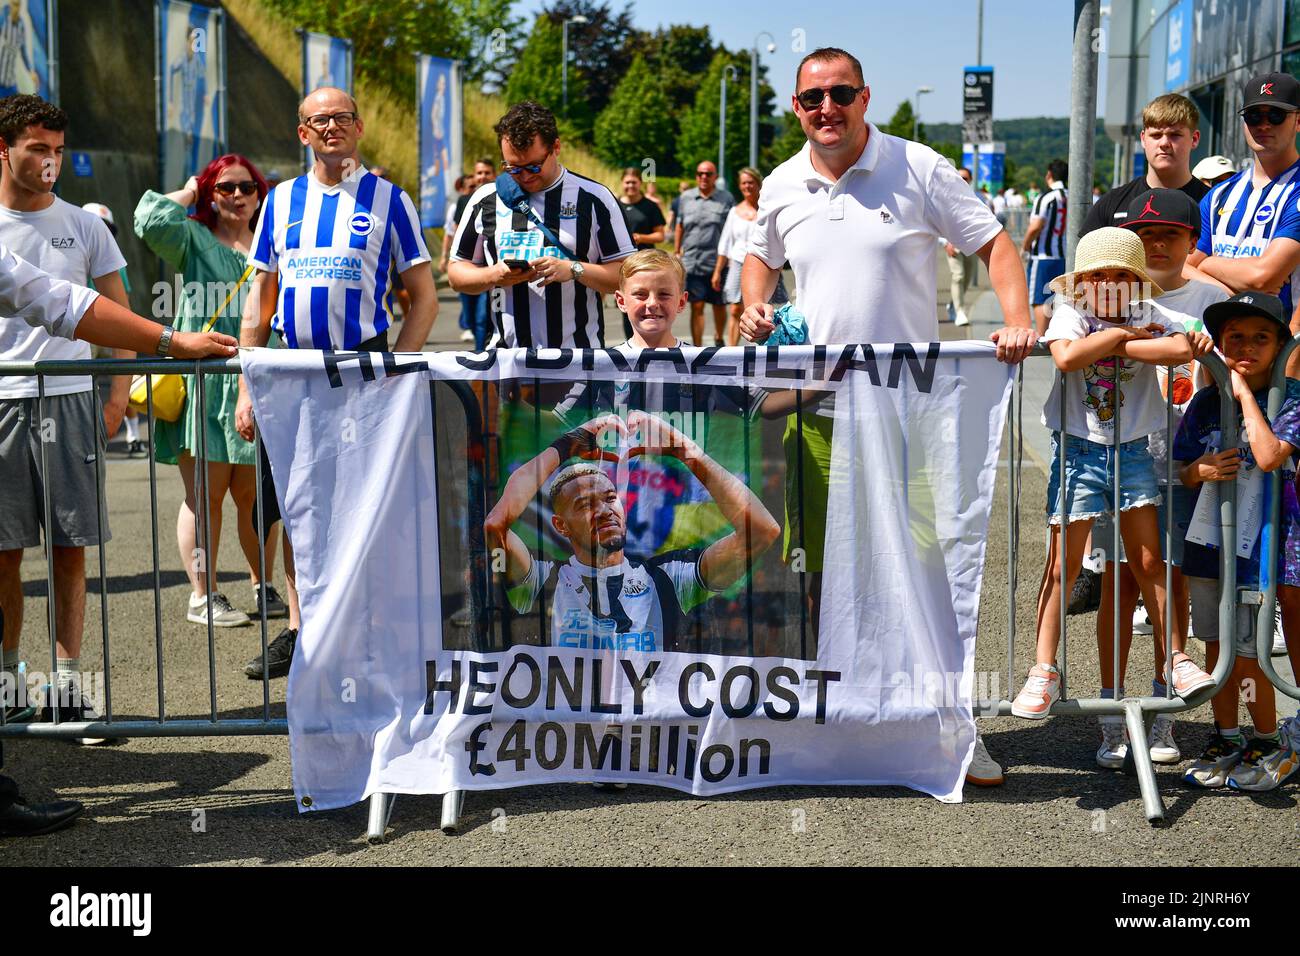 Brighton, UK. 13th Aug, 2022. Joelinton of Newcastle United fans show their support for him before the Premier League match between Brighton & Hove Albion and Newcastle United at The Amex on August 13th 2022 in Brighton, England. (Photo by Jeff Mood/phcimages.com) Credit: PHC Images/Alamy Live News Stock Photo